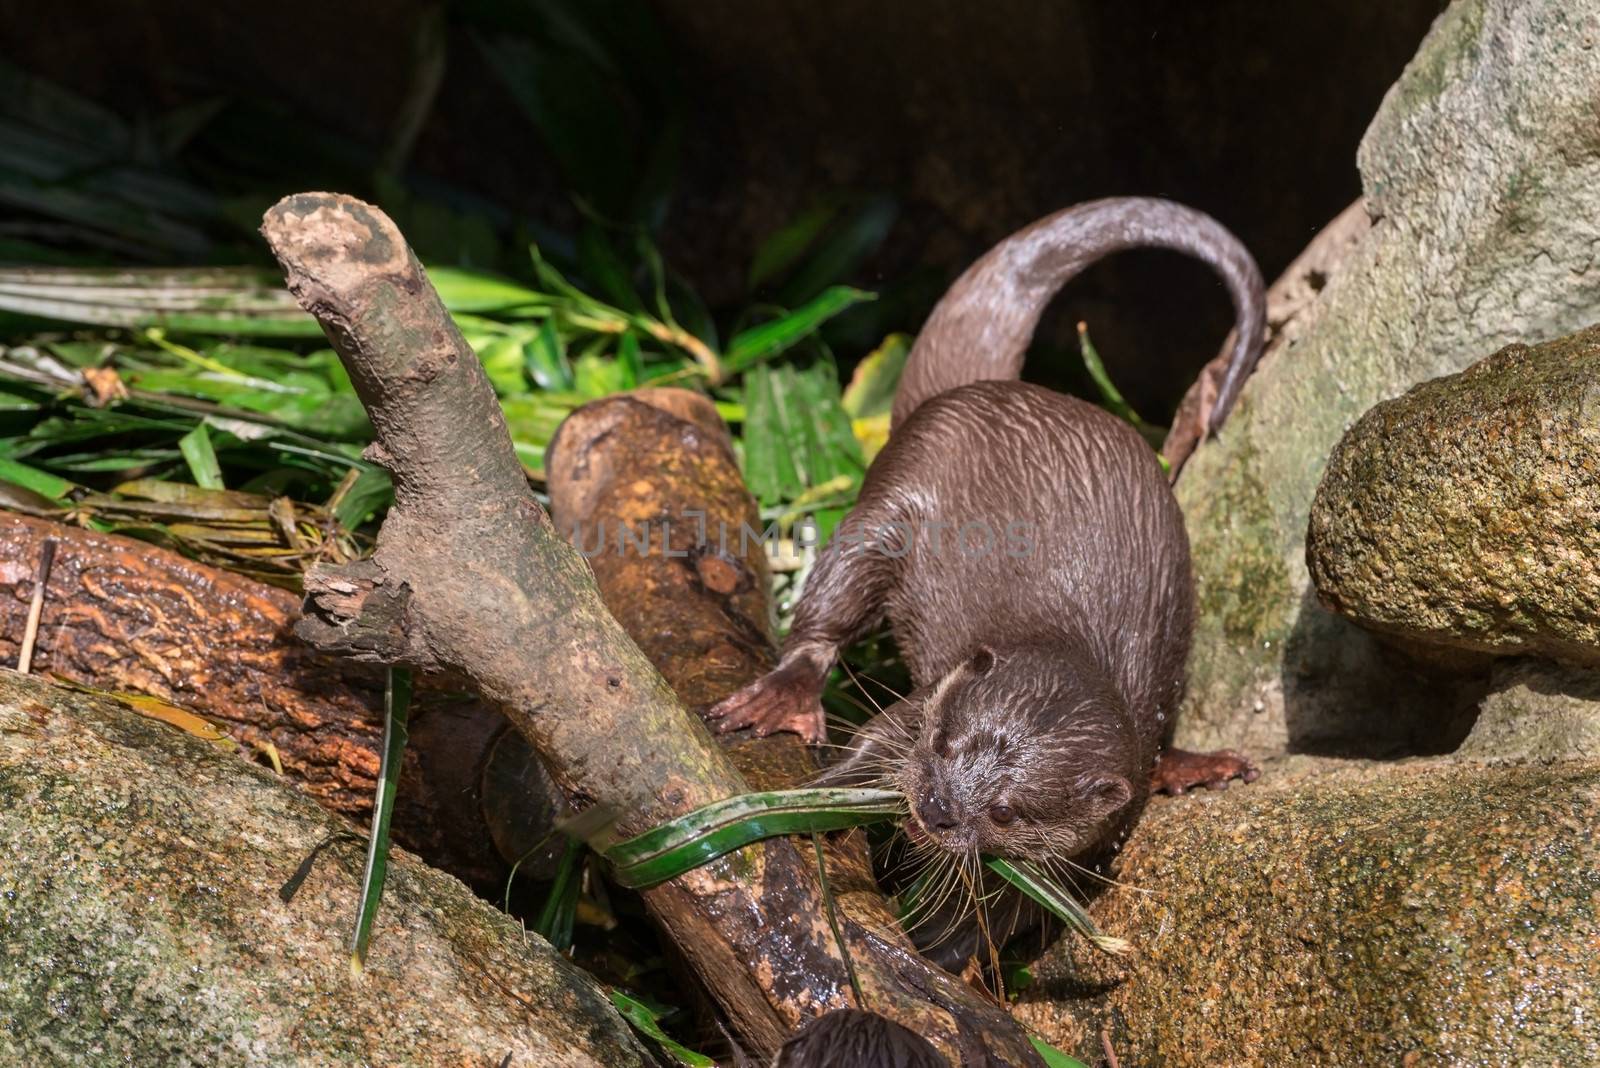 Asian small-clawered otter (Aonyx cinerea) in a front of cave